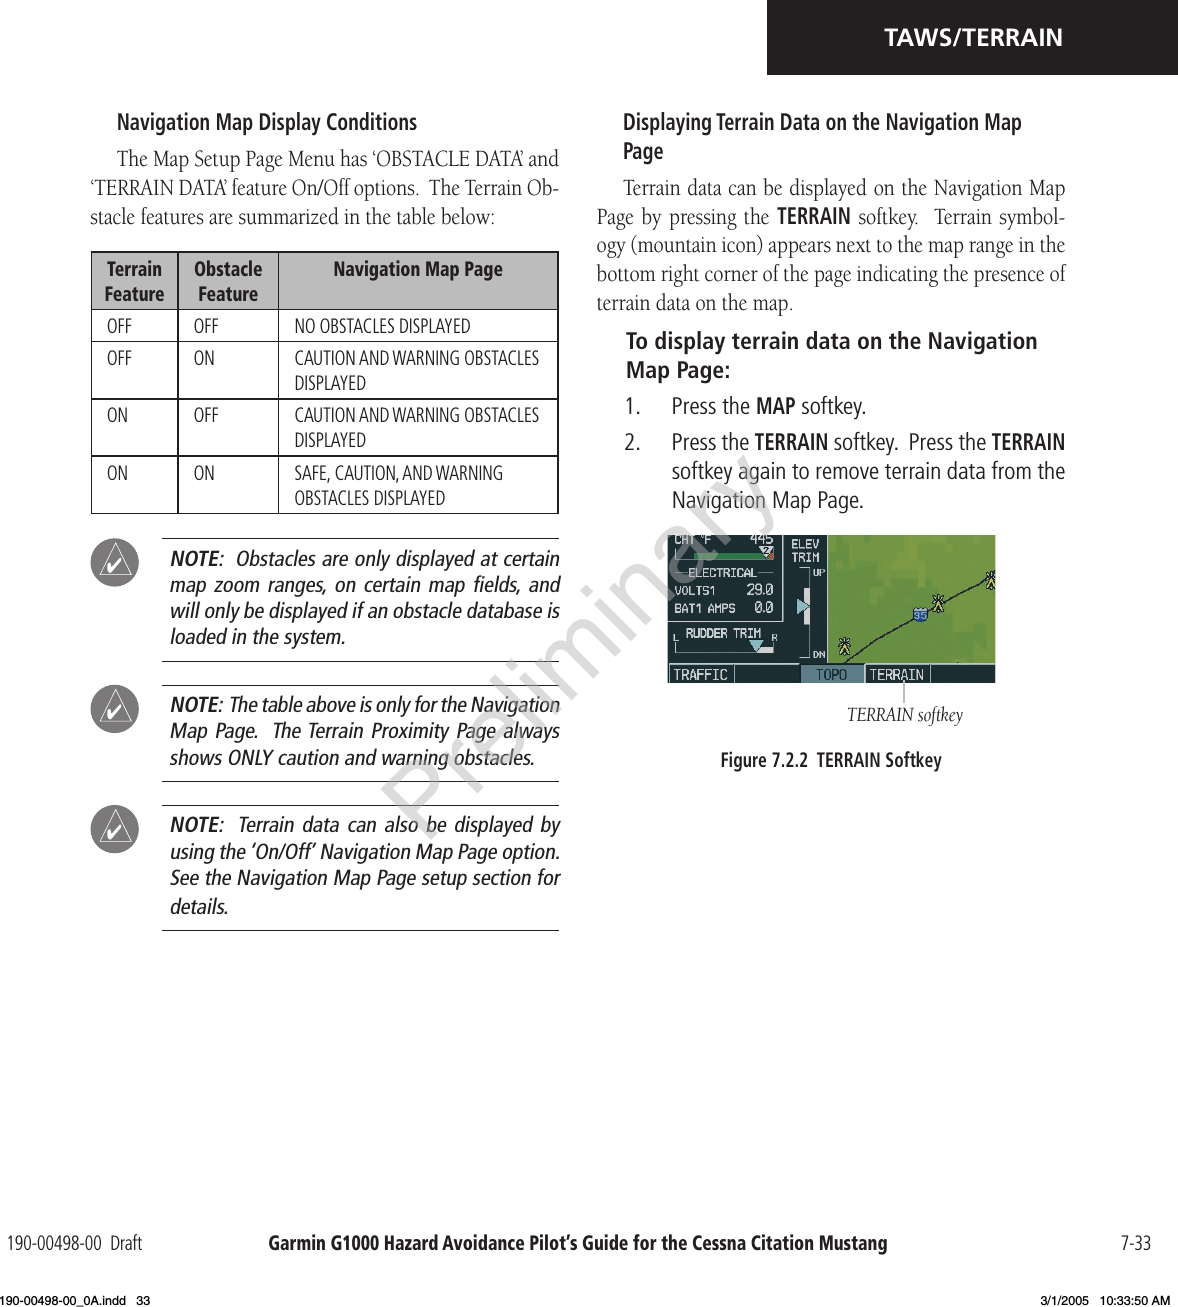 Garmin G1000 Hazard Avoidance Pilot’s Guide for the Cessna Citation Mustang190-00498-00  Draft 7-33TAWS/TERRAINNavigation Map Display ConditionsThe Map Setup Page Menu has ‘OBSTACLE DATA’ and ‘TERRAIN DATA’ feature On/Off options.  The Terrain Ob-stacle features are summarized in the table below:Terrain FeatureObstacle FeatureNavigation Map PageOFF OFF NO OBSTACLES DISPLAYEDOFF ON CAUTION AND WARNING OBSTACLES DISPLAYEDON OFF CAUTION AND WARNING OBSTACLES DISPLAYEDON ON SAFE, CAUTION, AND WARNING OBSTACLES DISPLAYED NOTE:  Obstacles are only displayed at certain map zoom  ranges,  on certain  map ﬁelds, and will only be displayed if an obstacle database is loaded in the system. NOTE:  The table above is only for the Navigation Map Page.  The Terrain Proximity Page always shows ONLY caution and warning obstacles.  NOTE:  Terrain data  can also  be displayed  by using the ‘On/Off’ Navigation Map Page option.   See the Navigation Map Page setup section for details.Displaying Terrain Data on the Navigation Map PageTerrain data can be displayed on the Navigation Map Page by  pressing the TERRAIN  softkey.   Terrain symbol-ogy (mountain icon) appears next to the map range in the bottom right corner of the page indicating the presence of terrain data on the map.To display terrain data on the Navigation Map Page:1.  Press the MAP softkey.2.  Press the TERRAIN softkey.  Press the TERRAIN softkey again to remove terrain data from the Navigation Map Page.TERRAIN softkeyFigure 7.2.2  TERRAIN SoftkeyPreliminary190-00498-00_0A.indd   33 3/1/2005   10:33:50 AM